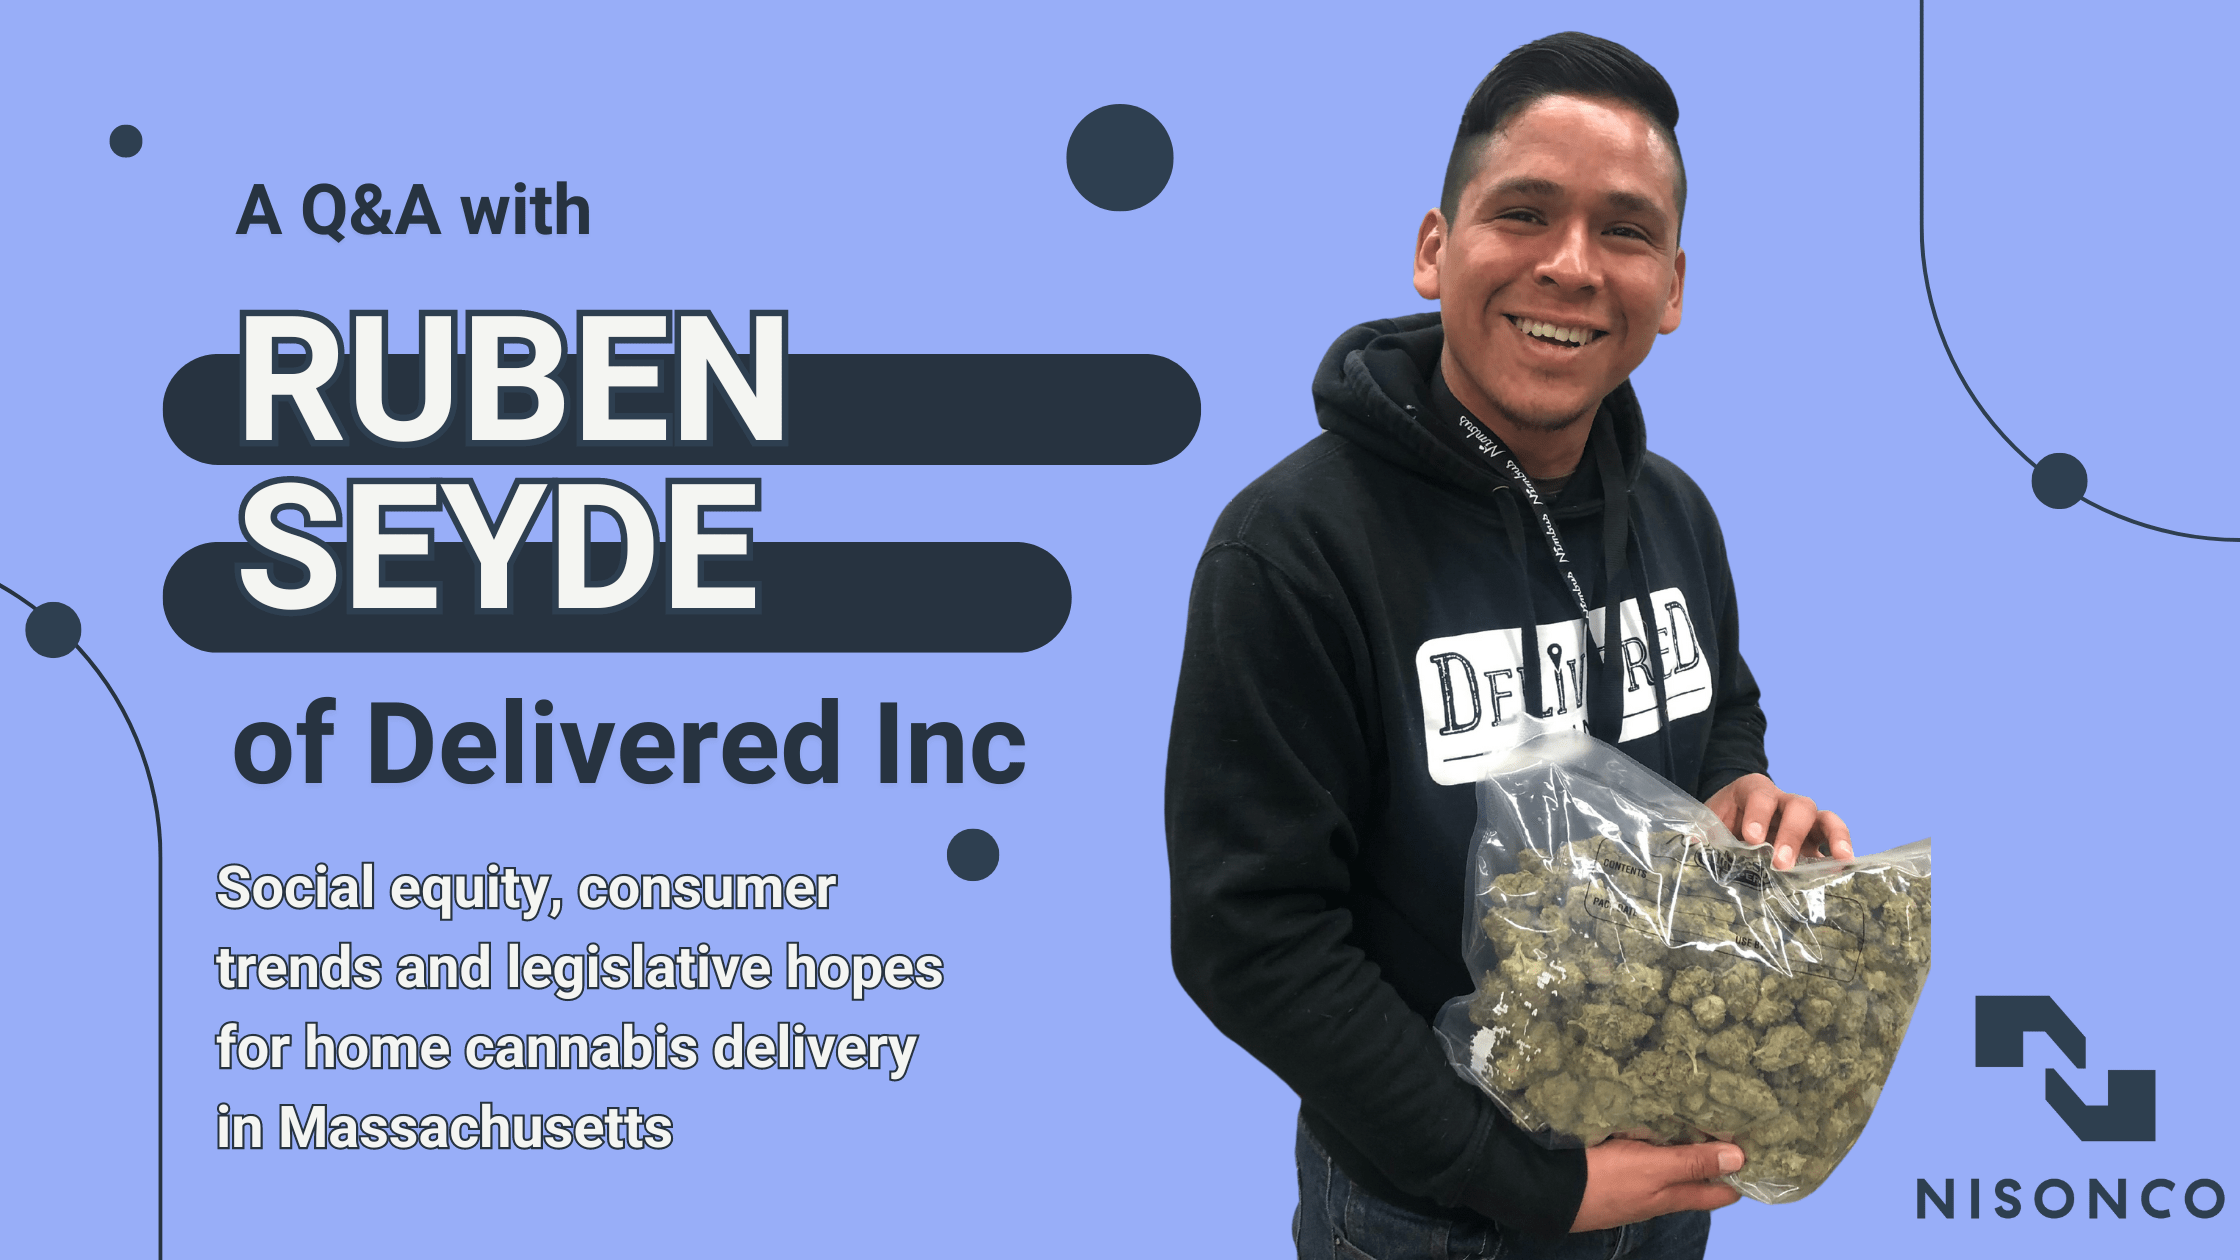 The text, 'A Q&A with Ruben Seyde of Delivered Inc. home delivery. Social equity, consumer trends and legislative hopes for home cannabis delivery in Massachusetts' is to the left of an image of Seyde smiling and holding a large bag of cannabis